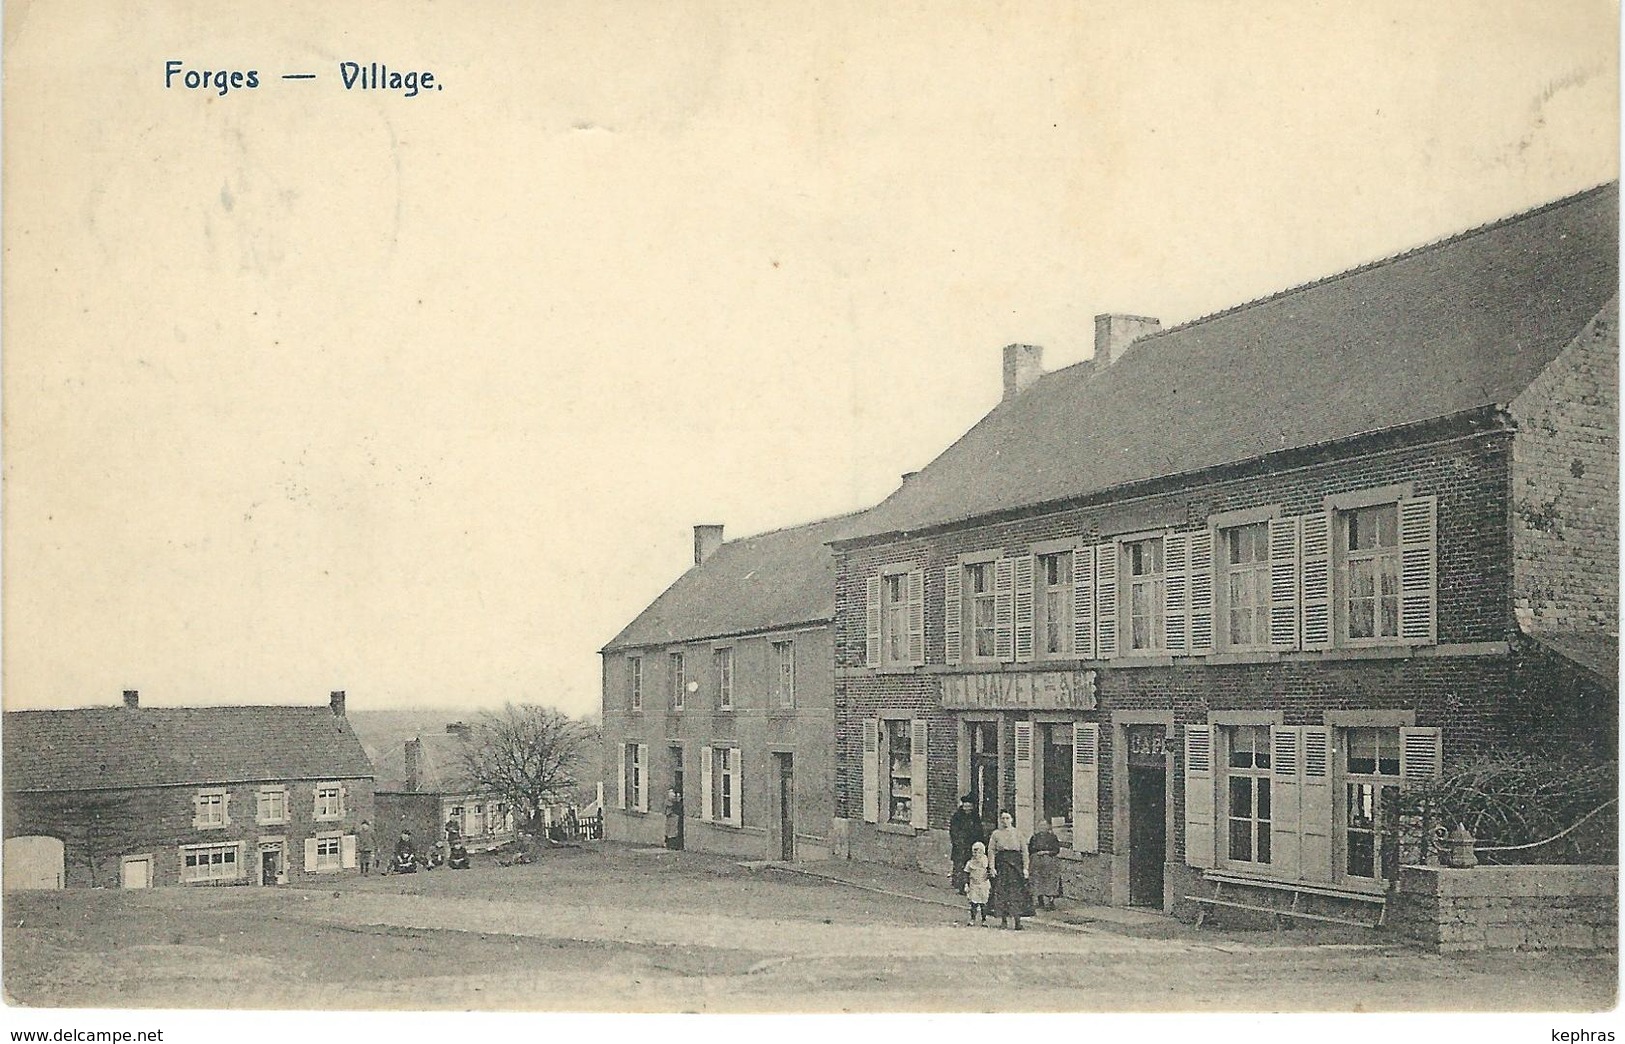 FORGES (CHIMAY) : Village - RARE CPA - Chimay